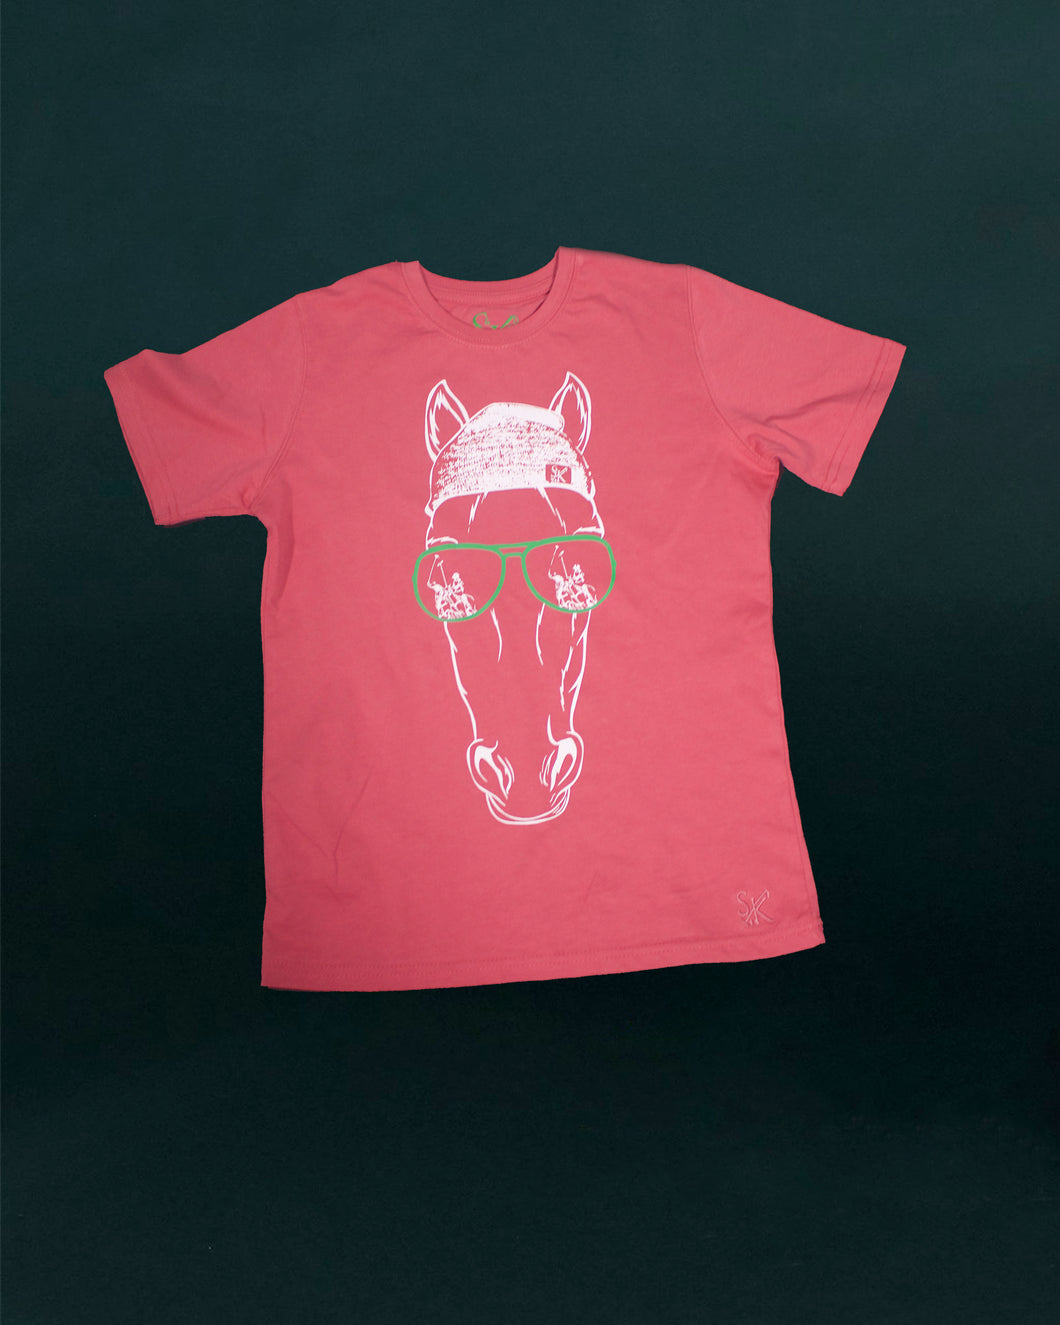 Polo Pony Tee (Faded red/white)